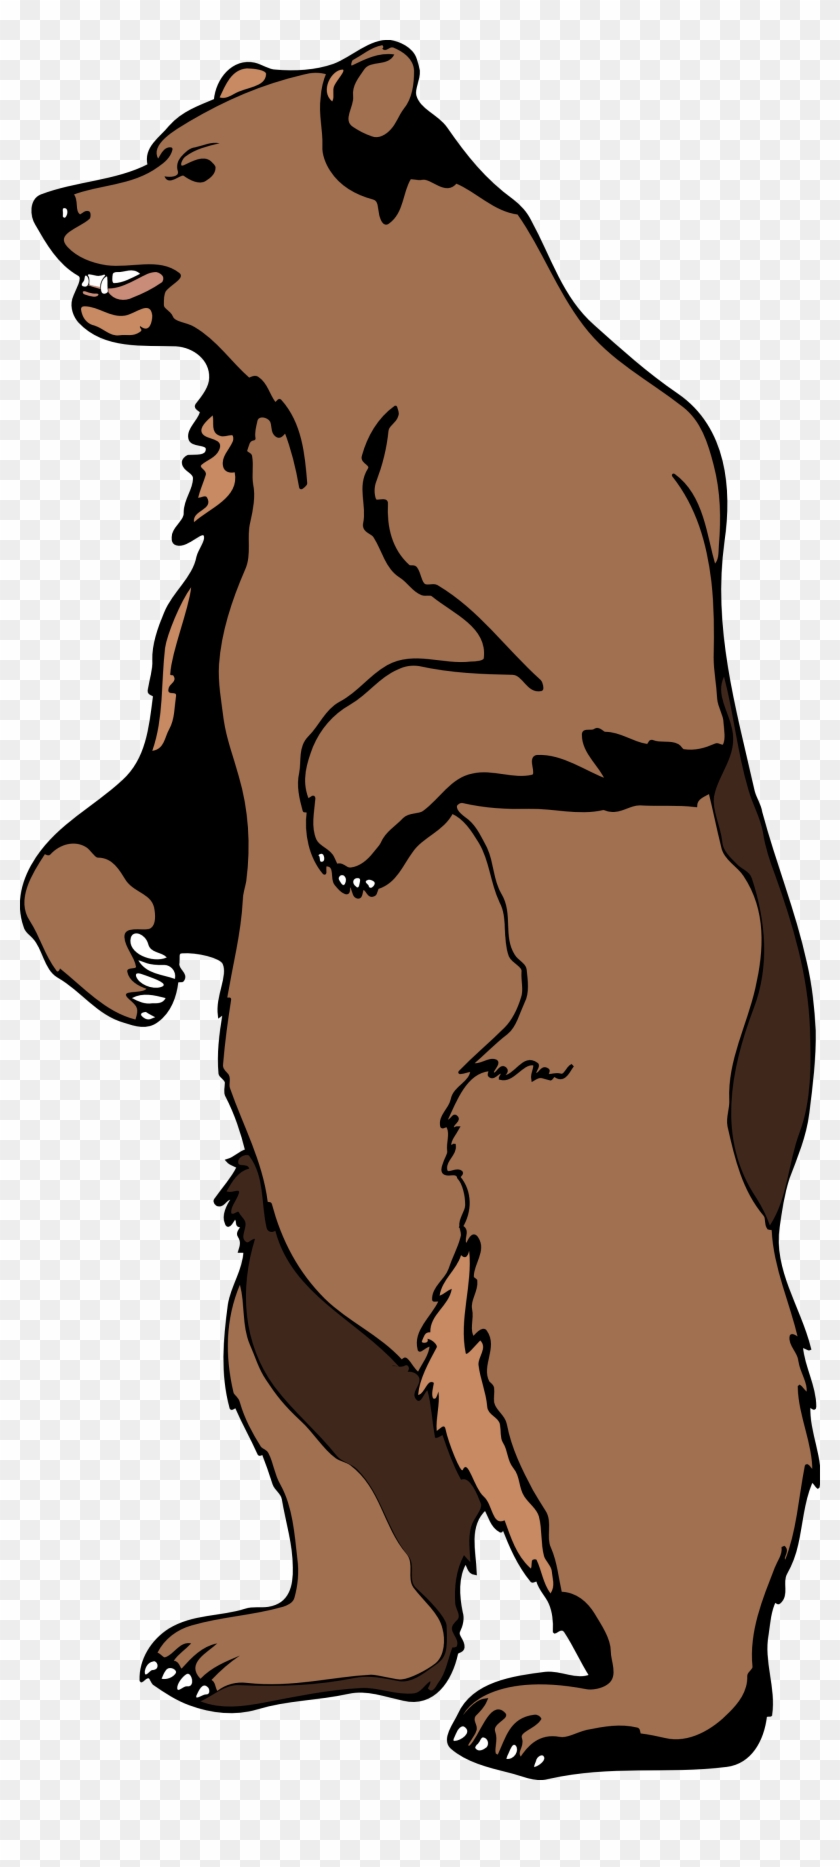 Clip Art Grizzly Bear - Standing Grizzly Bear Clipart - Png Download #662957